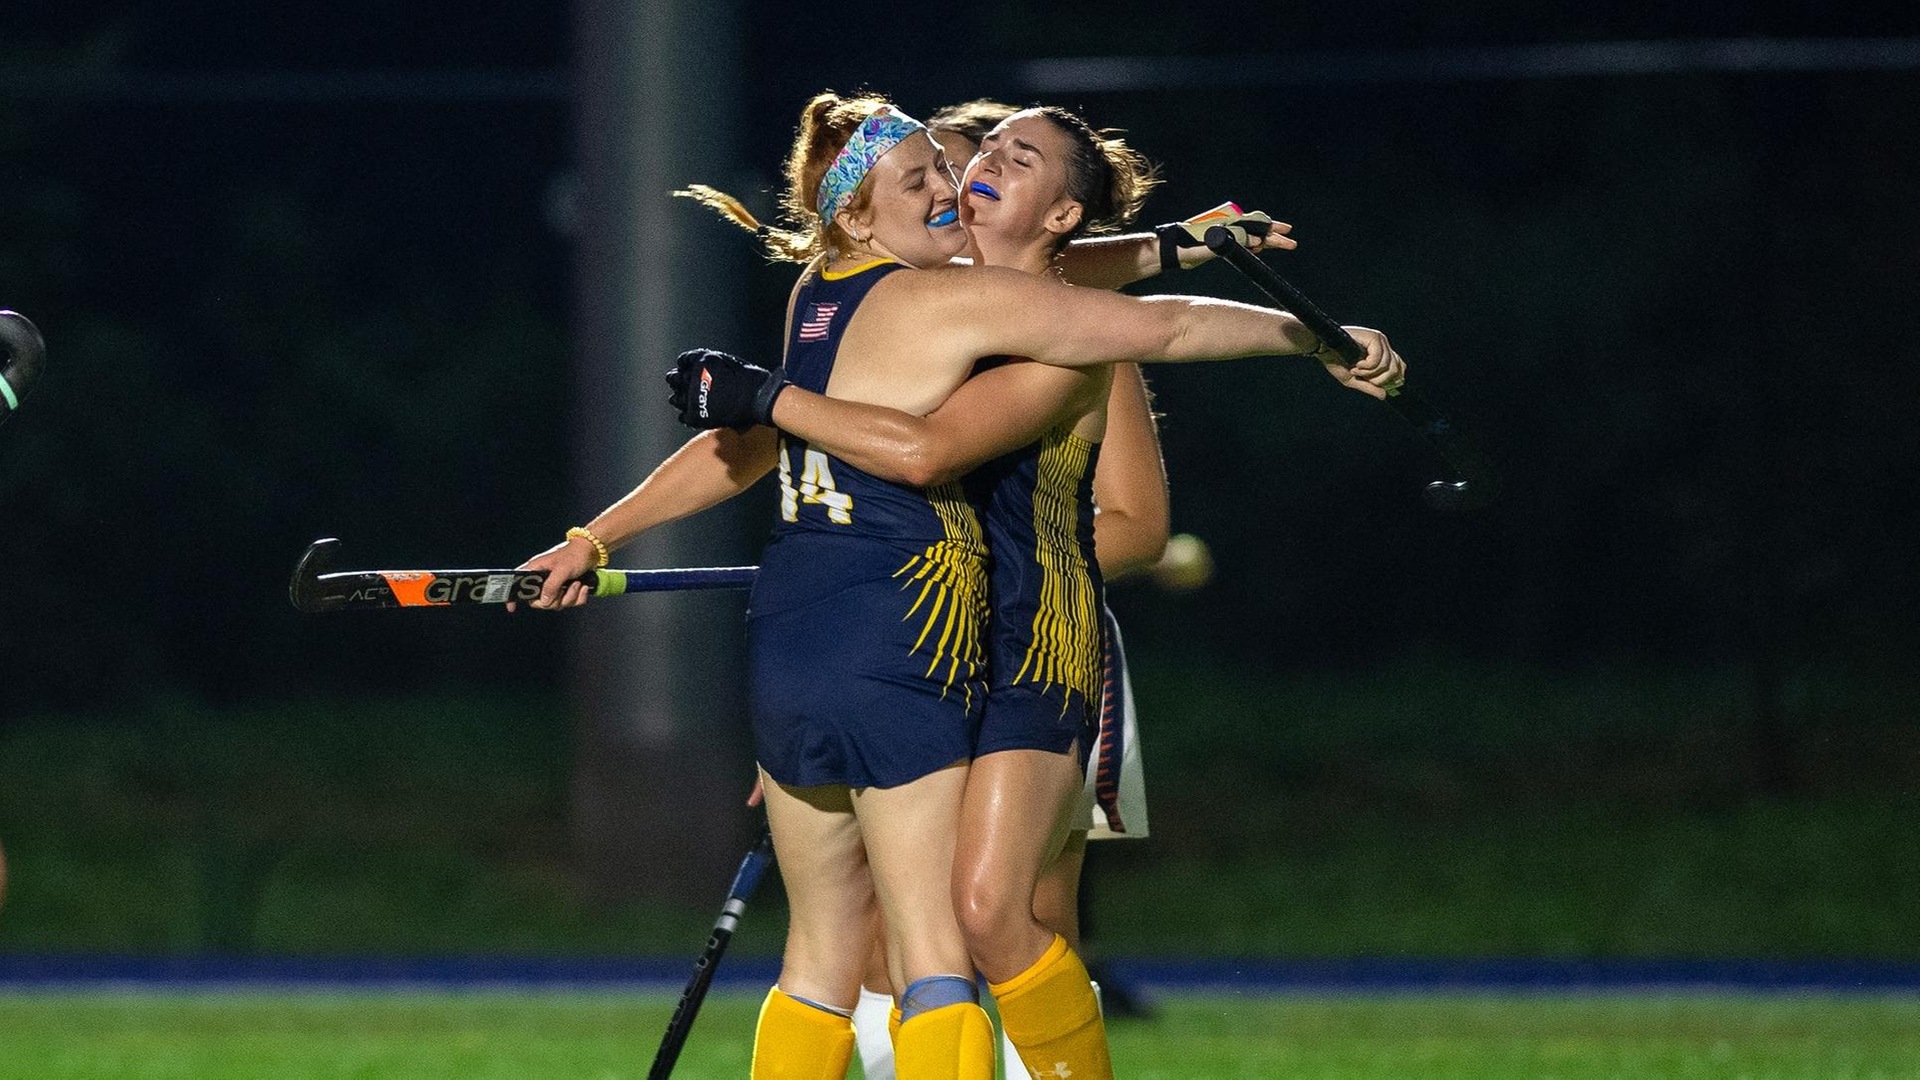 Field Hockey Picks Up First Win, Defeats Anna Maria on the Road Tuesday, 3-1